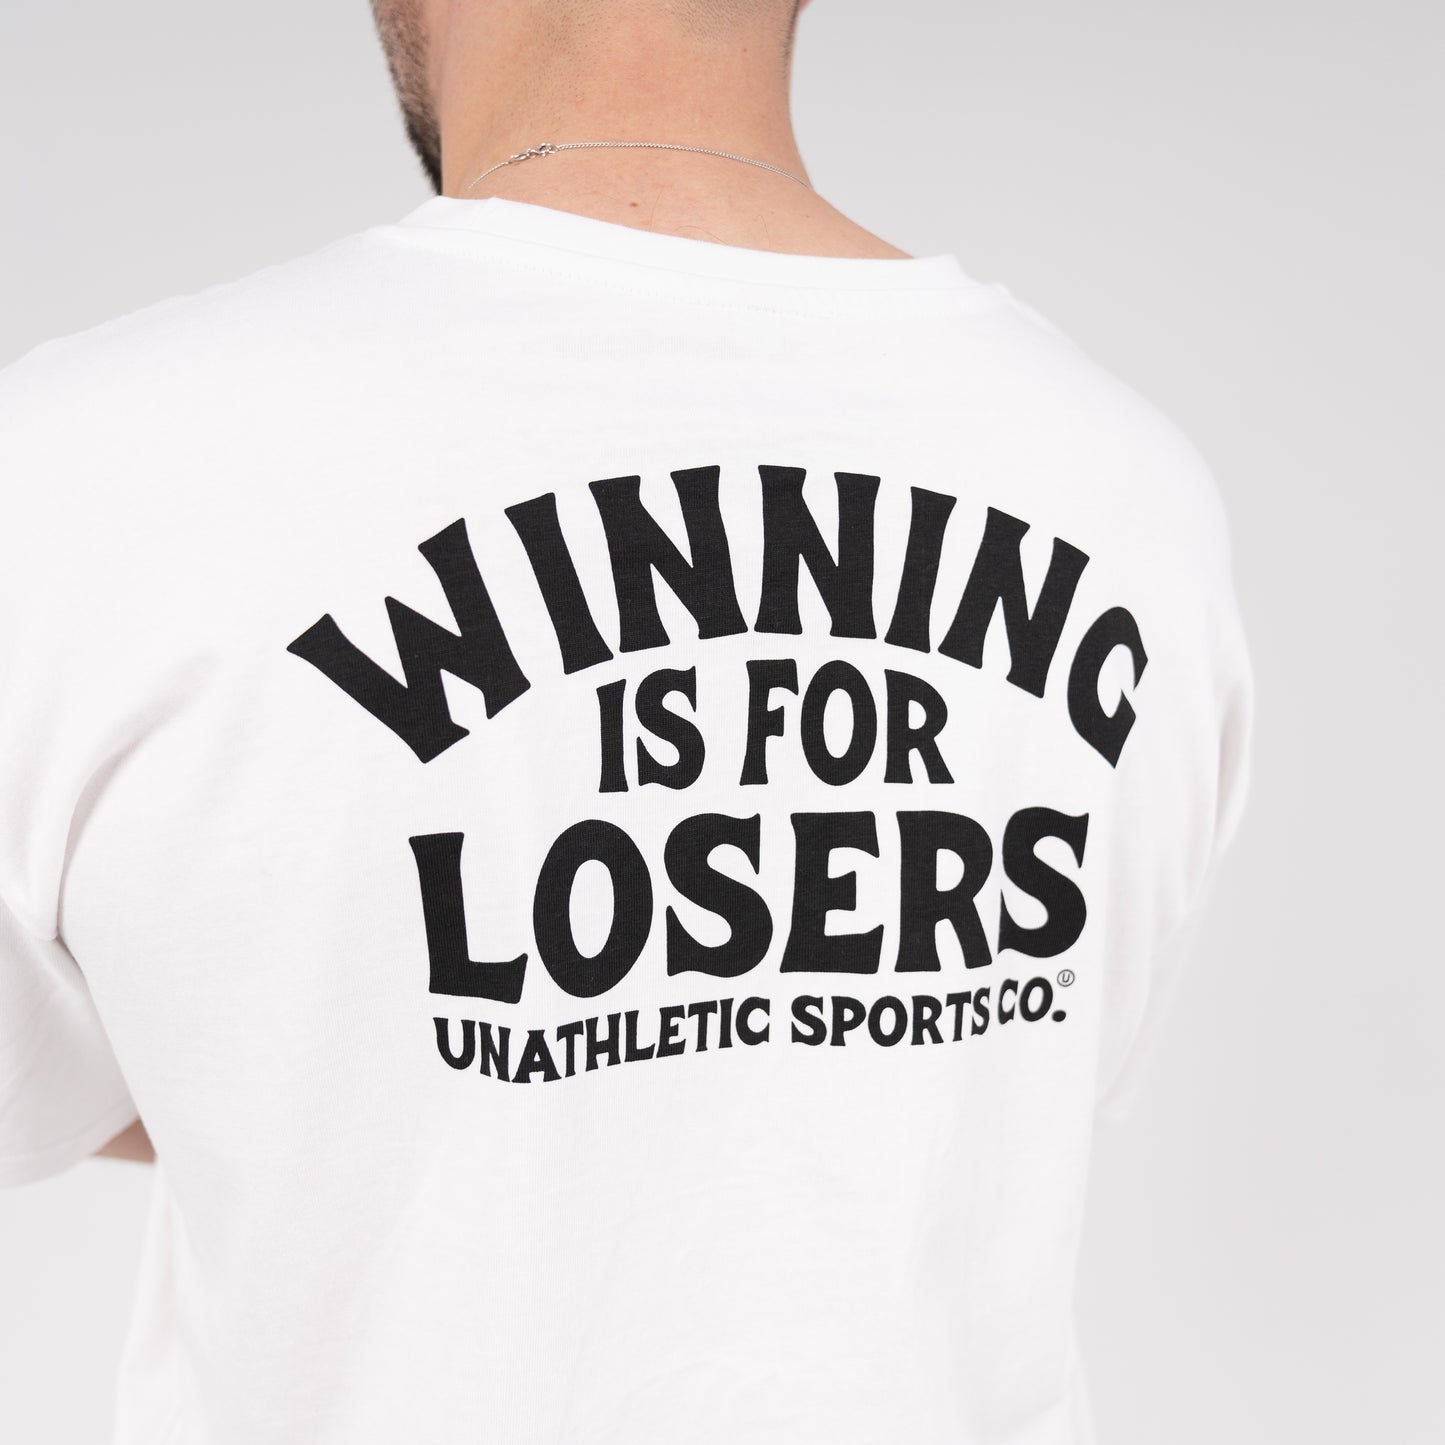 "Winning is for Losers" Tee - White